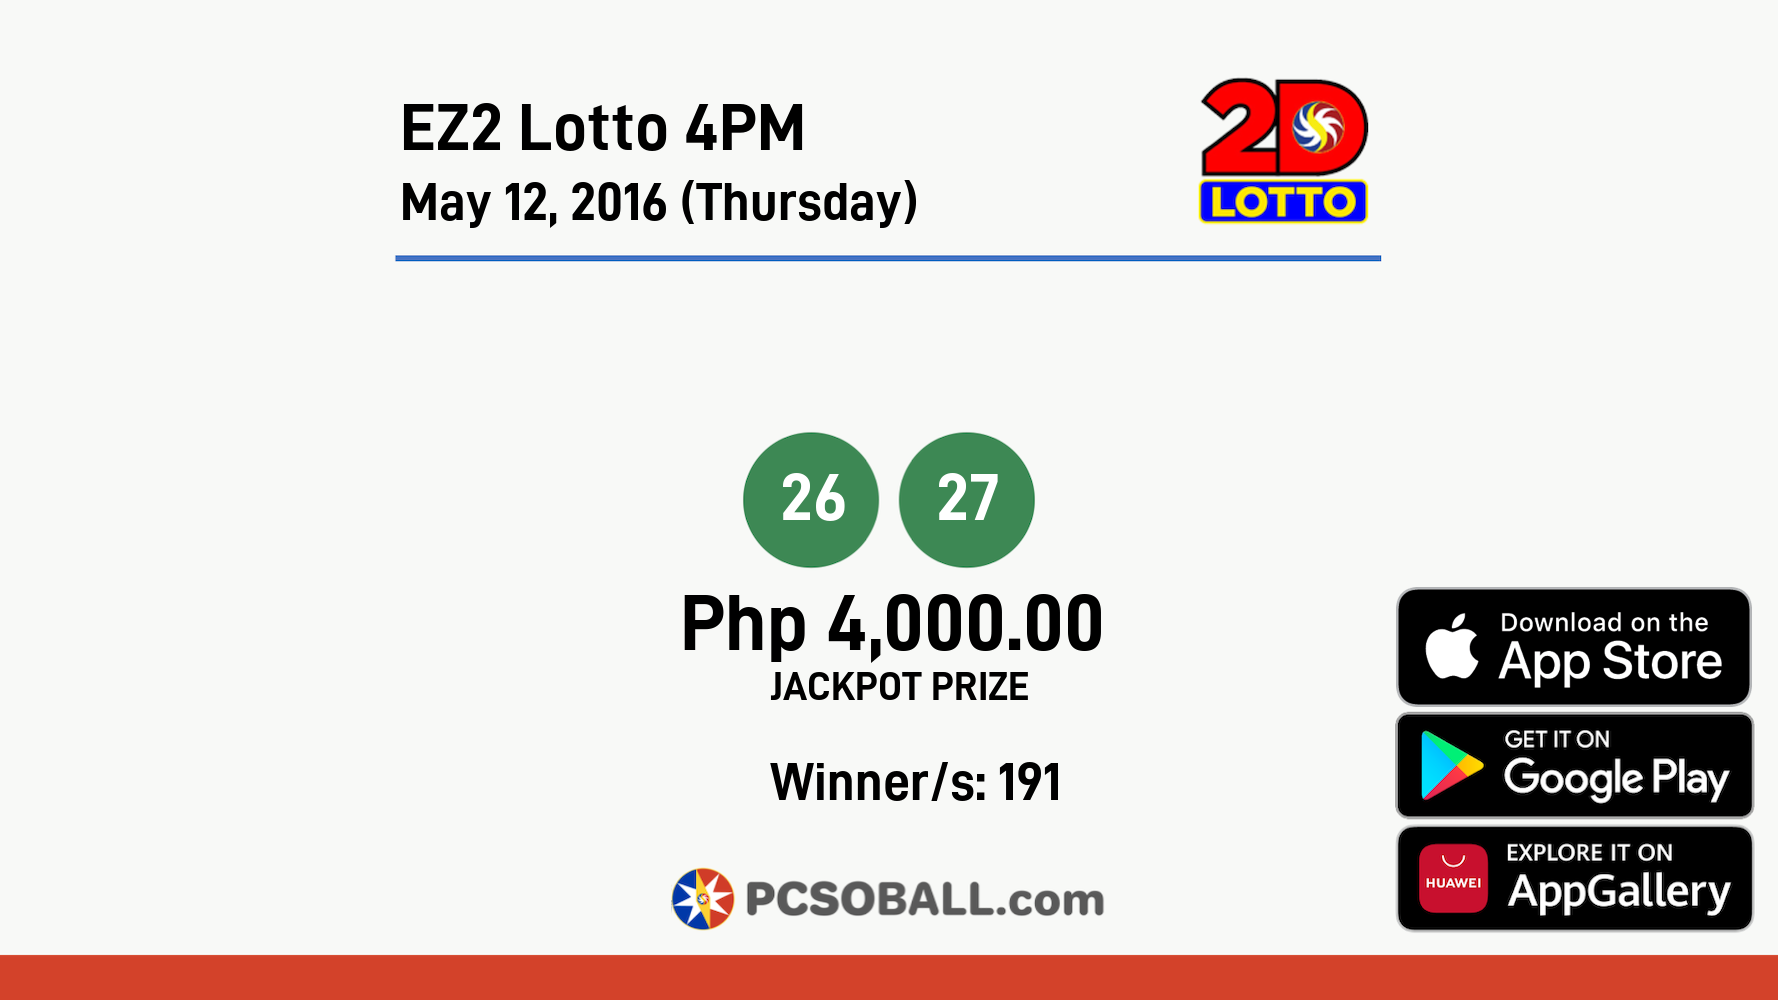 EZ2 Lotto 4PM May 12, 2016 (Thursday) Result